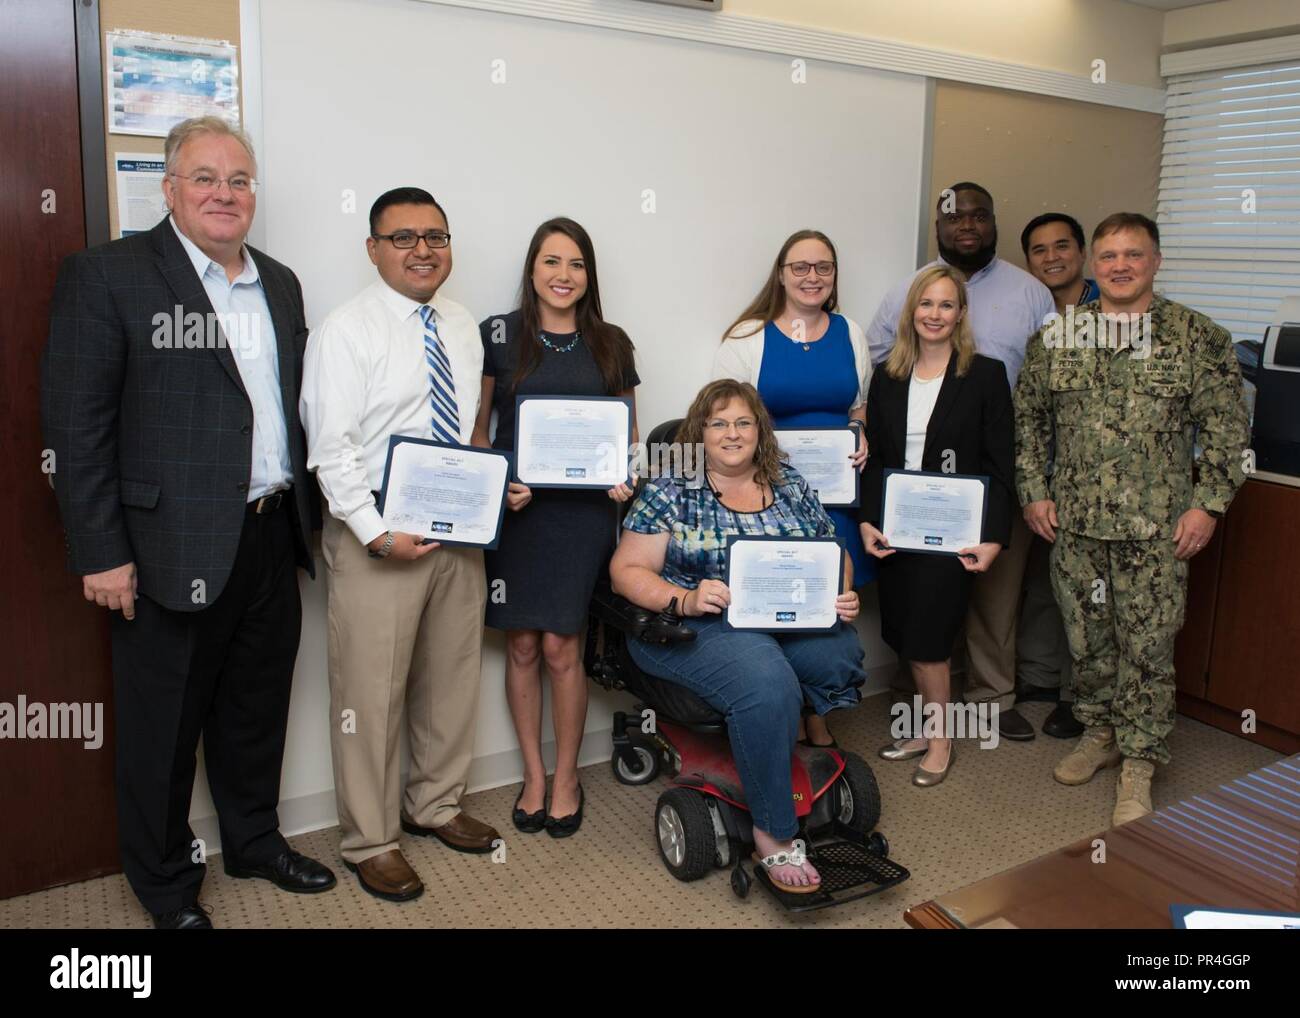 PANAMA CITY, Florida - Naval Surface Warfare Center Panama City Division (NSWC PCD) personnel, who are part of the interdisciplinary Naval Sea Systems Command (NAVSEA) People's Integrated Essential Resource (PIER) team, are recognized with a Special Act Award for their contributions to the NAVSEA Enterprise project Sept. 13, 2018. Pictured from left to right: NSWC PCD Technical Director Ed Stewart (SES), David Galindo, Katherine Mapp, Allison Roberts, Kimberly Ten Broeck, Holly Gardner, Keely Westbrook, Vatana An, and NSWC PCD Commanding Officer Capt. Aaron Peters, USN. U.S. Navy Stock Photo